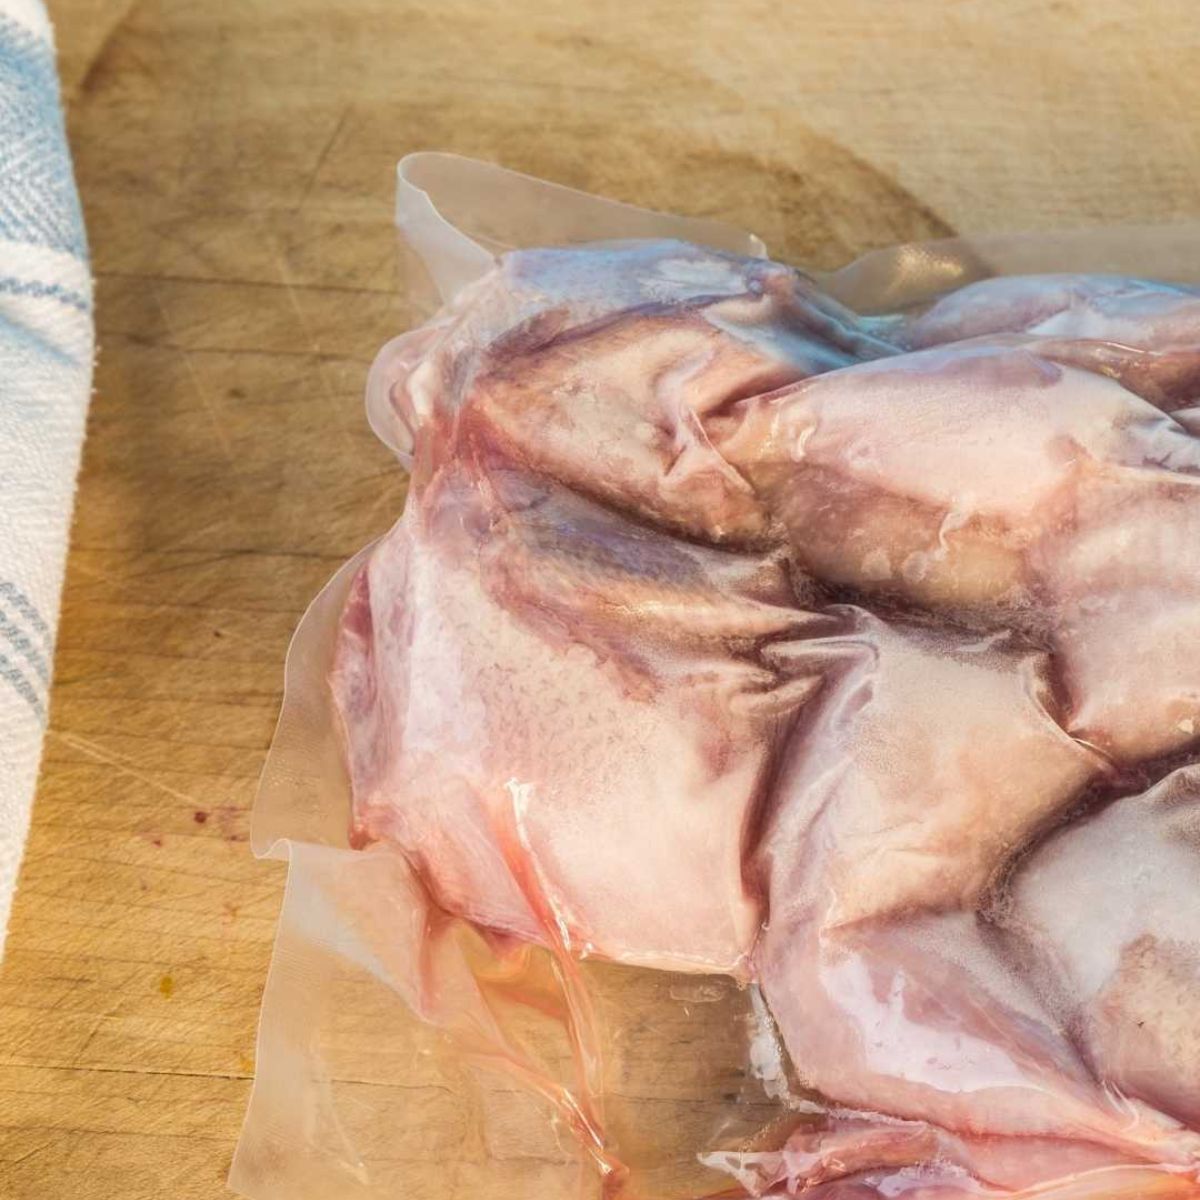 5 Easy Ways to Thaw Meat Fast Quickly and Safely